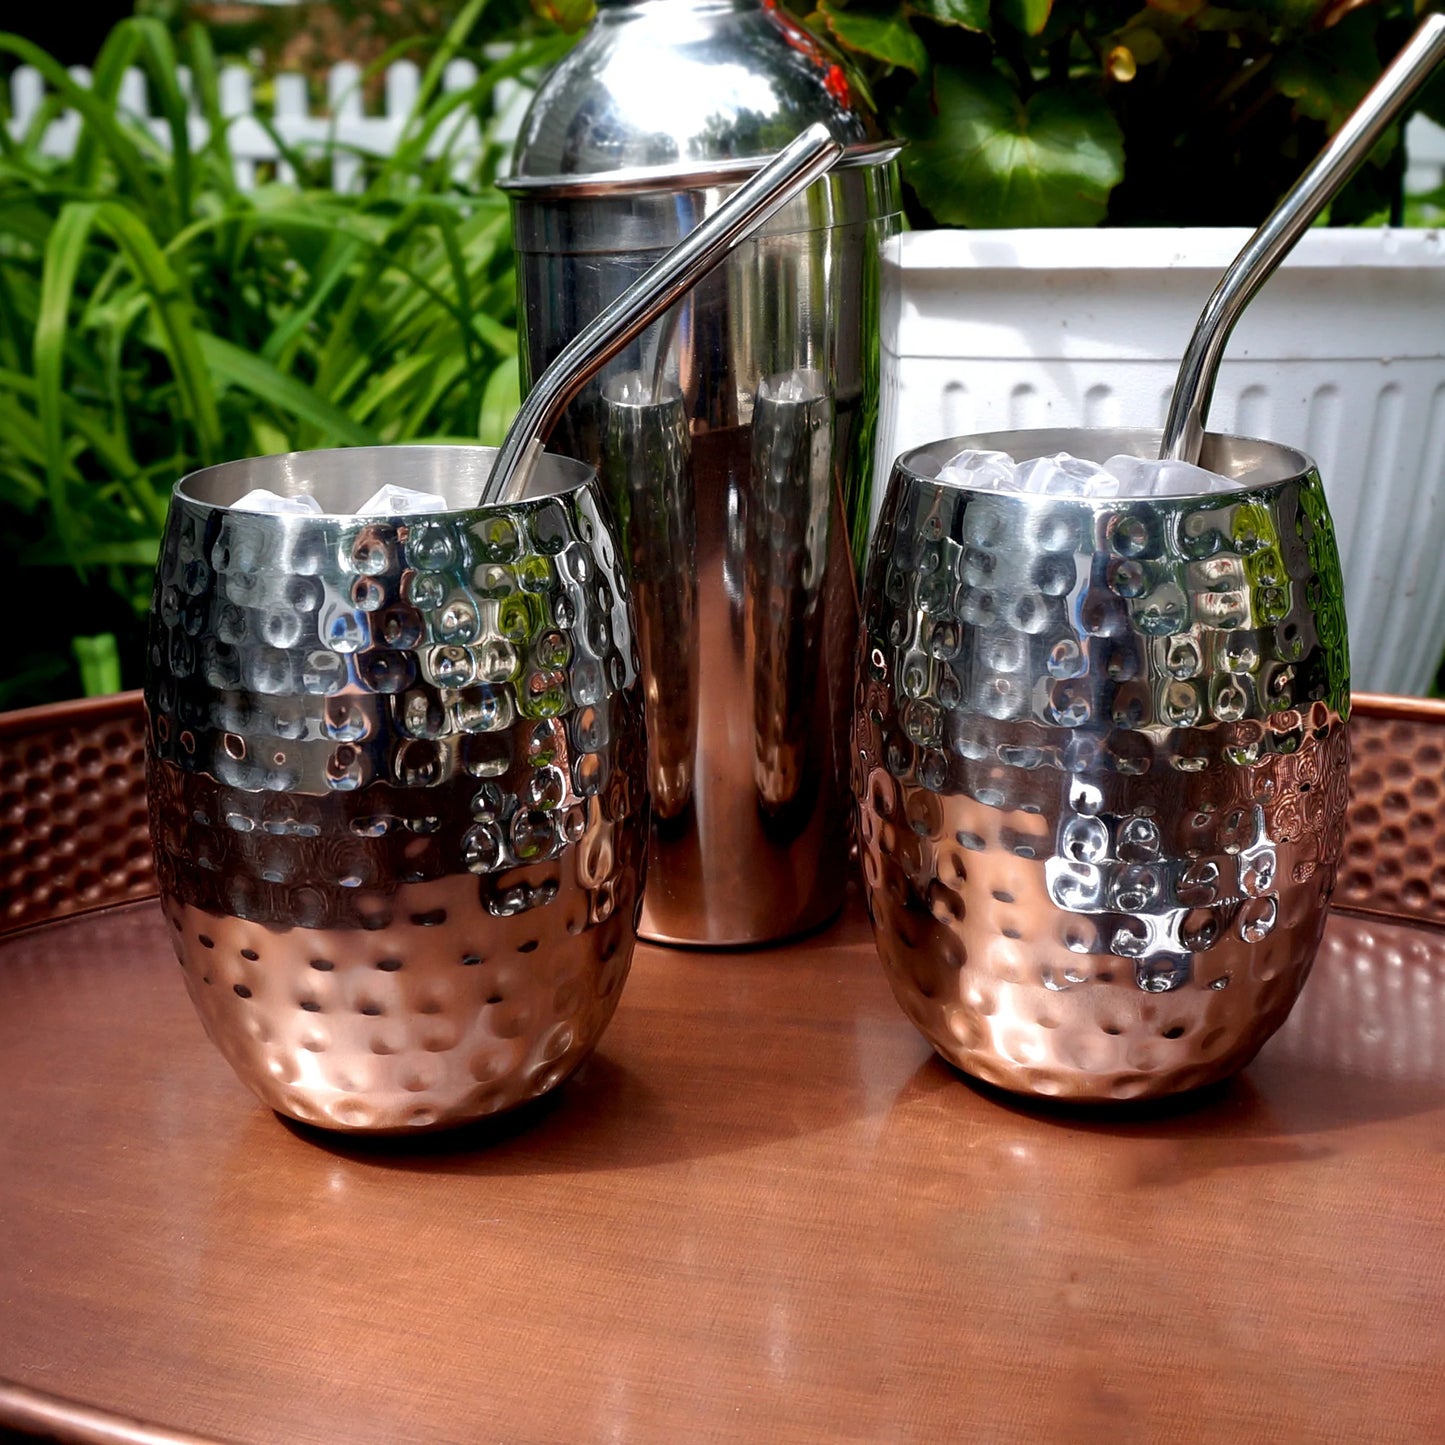 Drink tumbler cups made of stainless steel with double wall insulated construction to use for cocktails, moscow mules, or sangria.  Serve party guests the coldest drinks possible.  Large 18oz size made of food safe stainless steel.